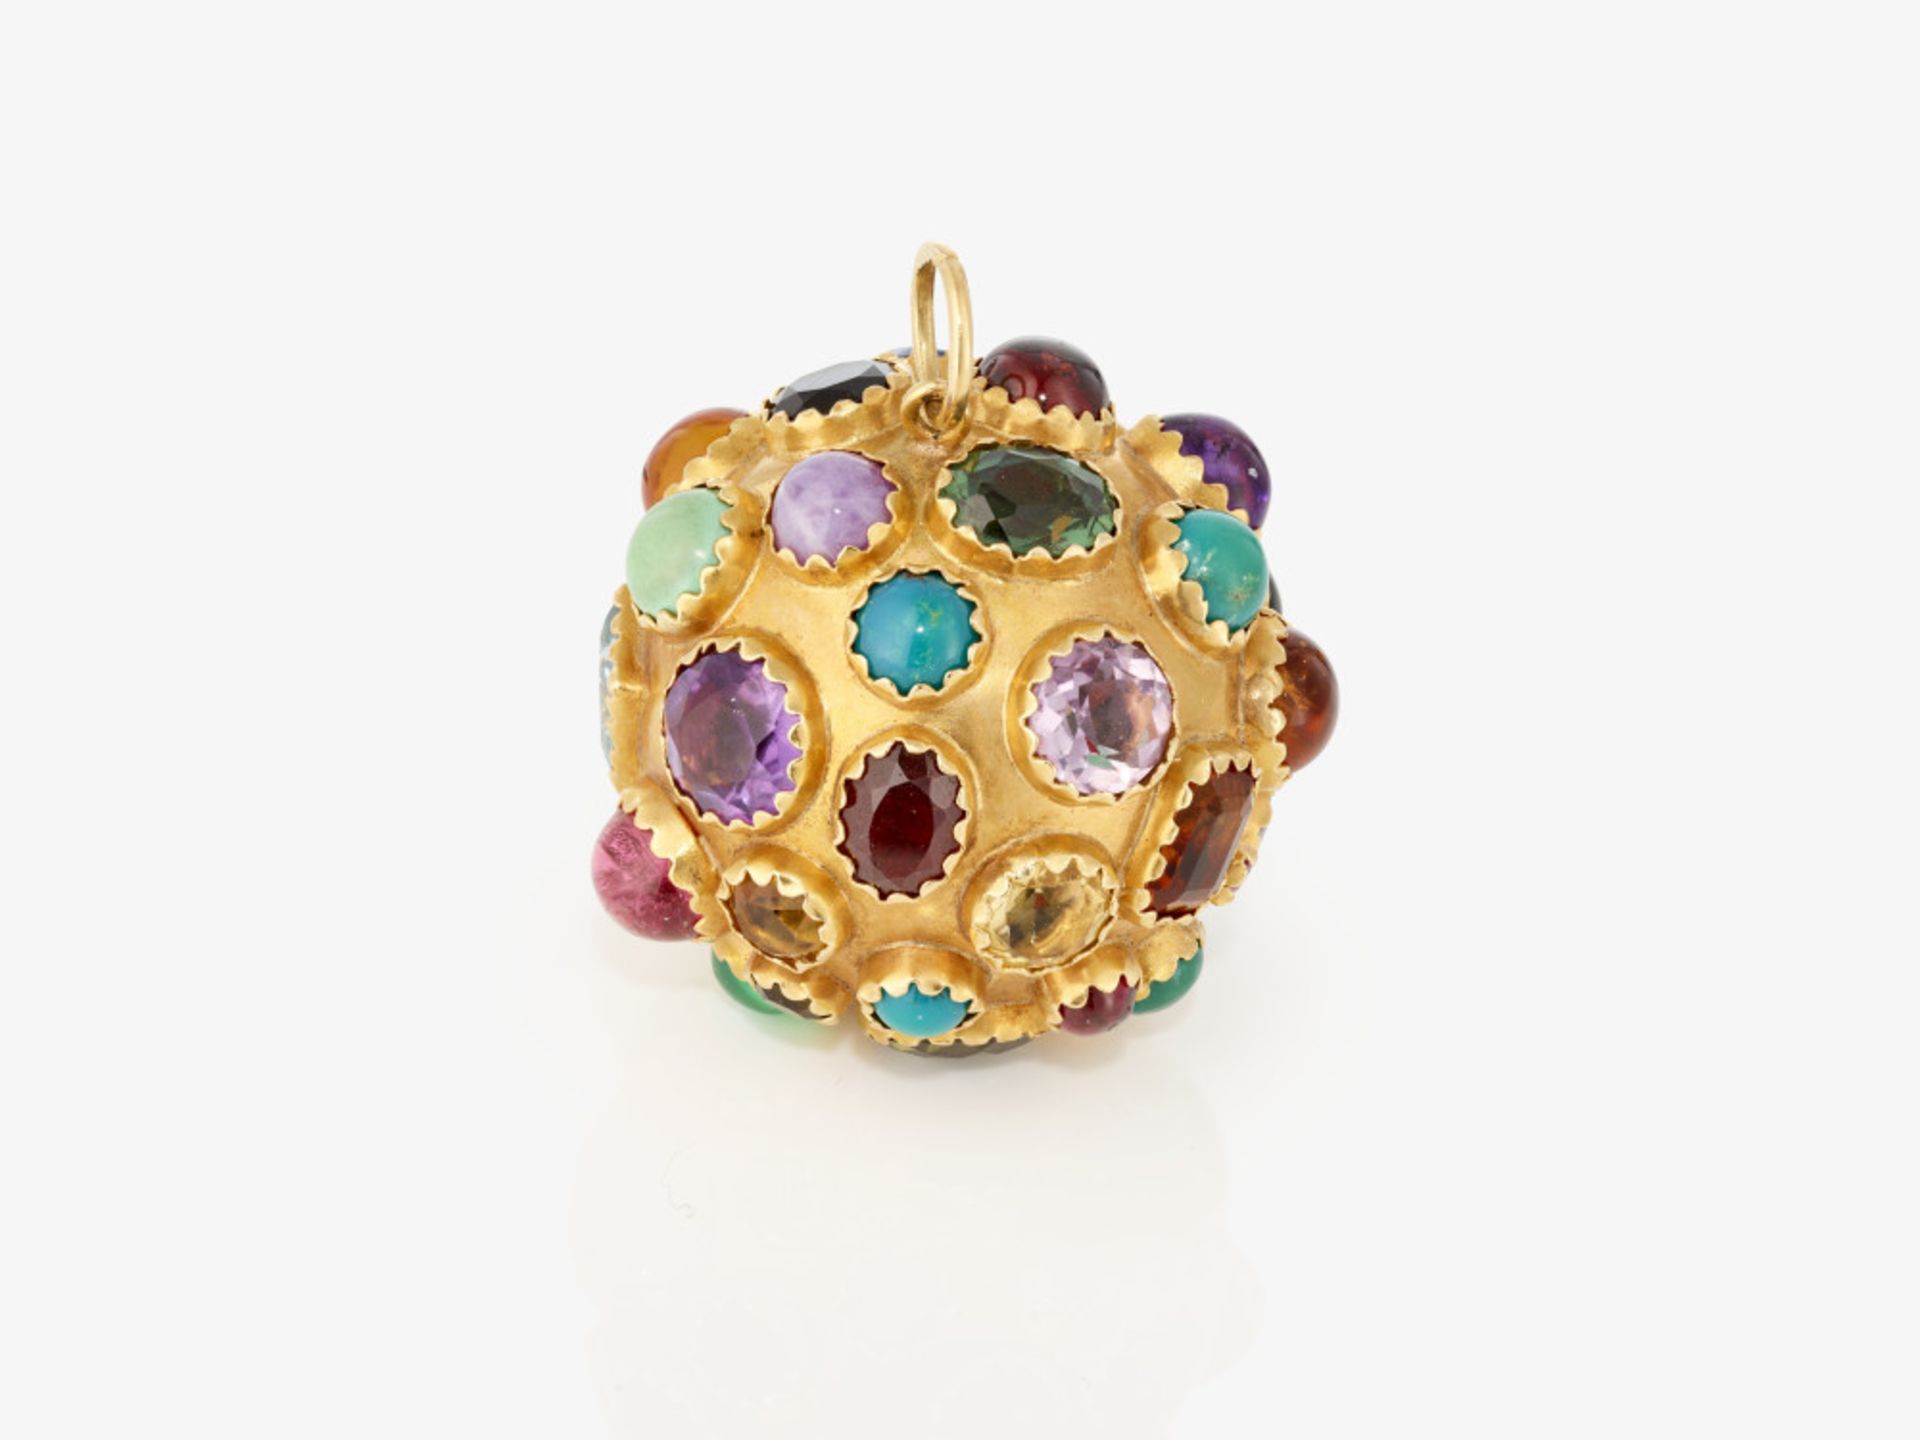 A spherical pendant with numerous coloured gemstones - Germany, 1970s - Image 3 of 3